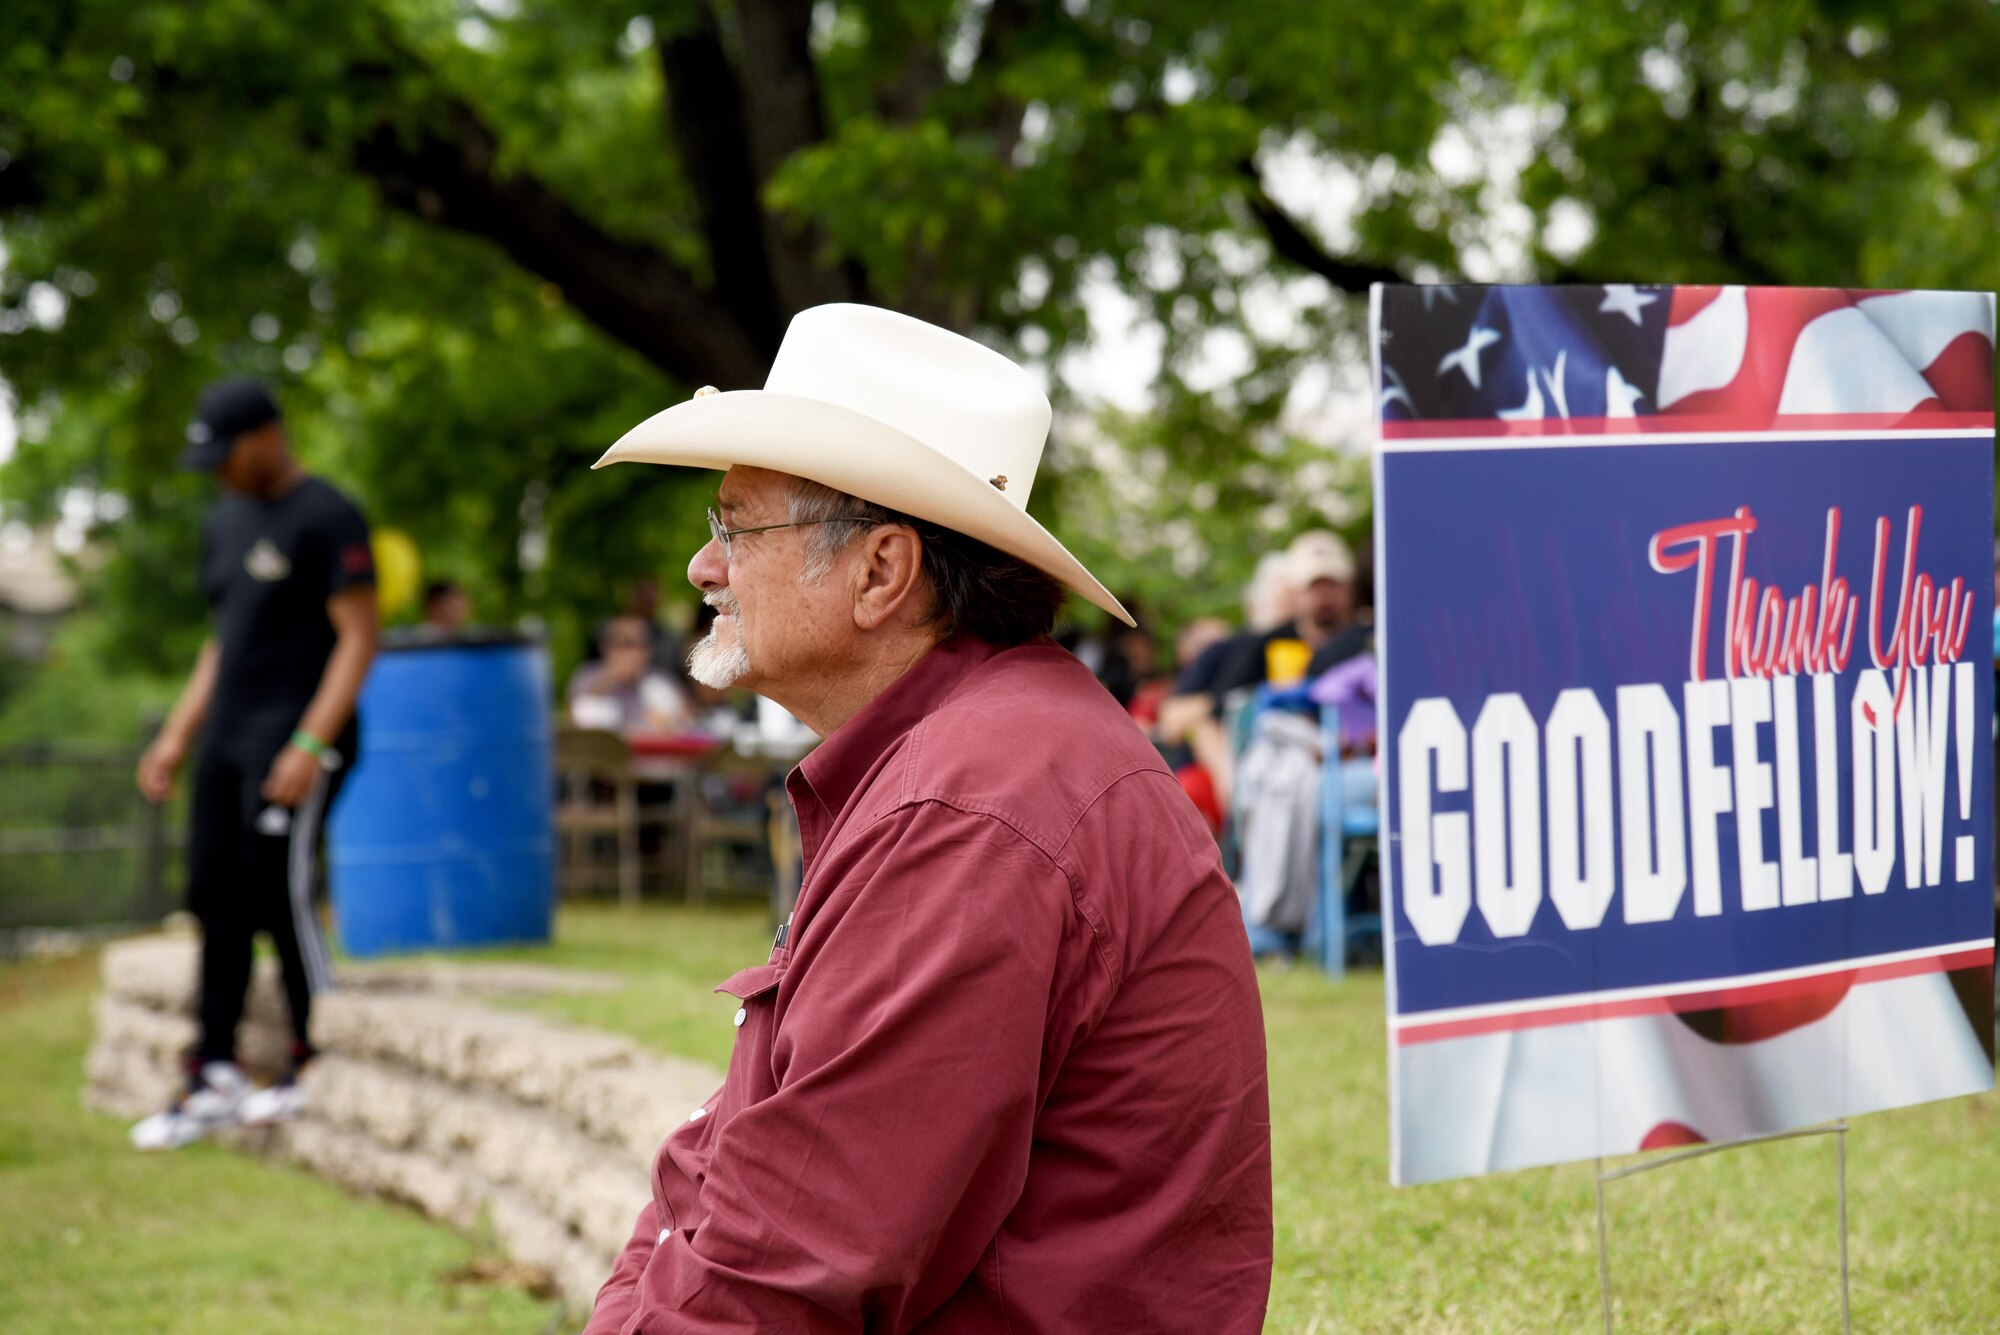 Dwain Morrison, San Angelo mayor, listens to the U.S. Air Force Band of the West, Sky Country, during Goodfellow Appreciation Day at the RiverStage in San Angelo, Texas, May 21, 2016. Sky Country covered various songs throughout the day to entertain event attendees and volunteers for the San Angelo Chamber of Commerce hosted Armed Forces Day celebration. (U.S. Air Force photo by Senior Airman Joshua Edwards/Released)